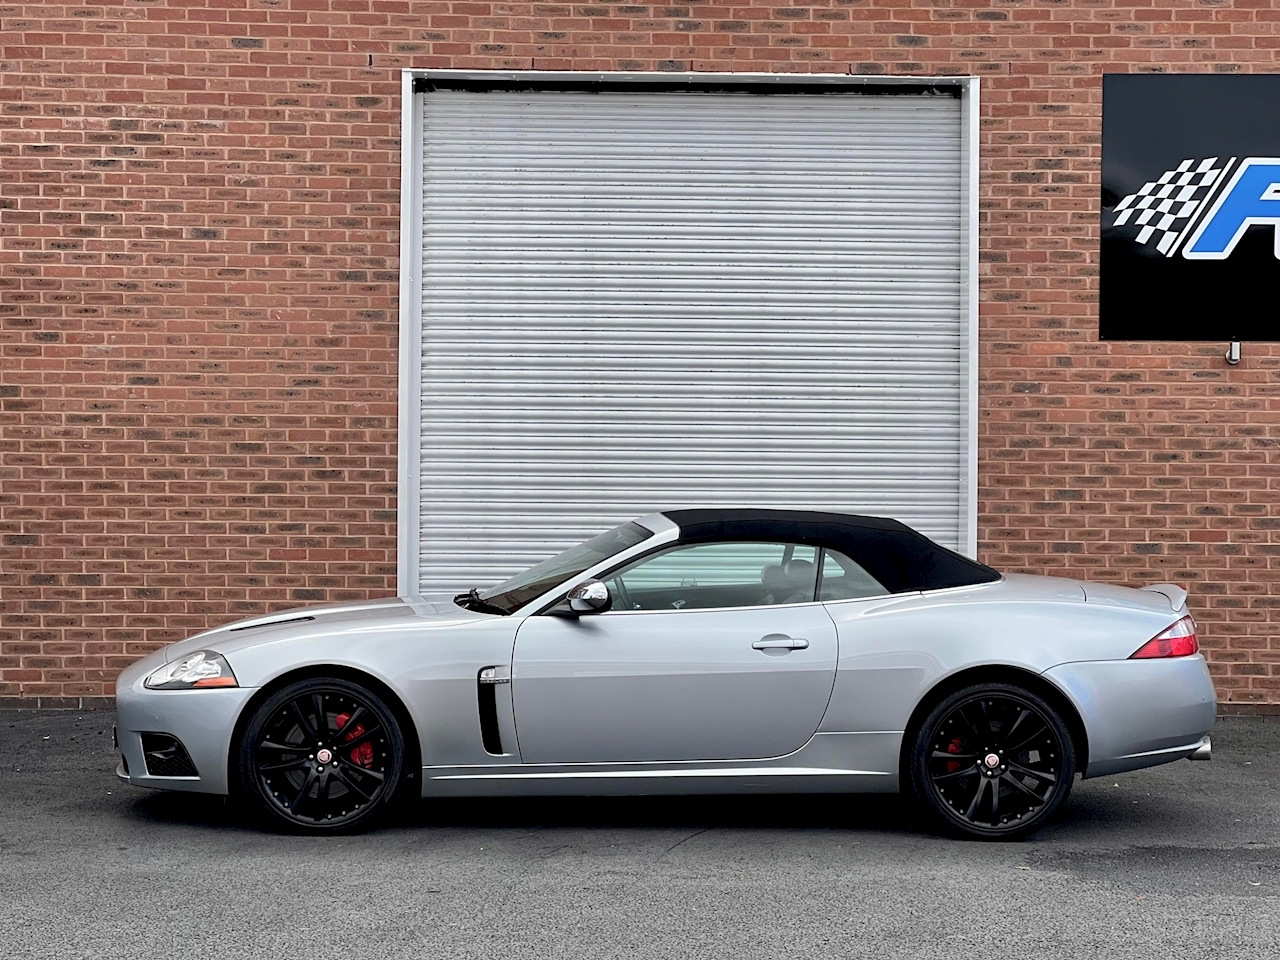 XKR 4.2 SUPERCHARGED 4.2 3dr Coupe Petrol